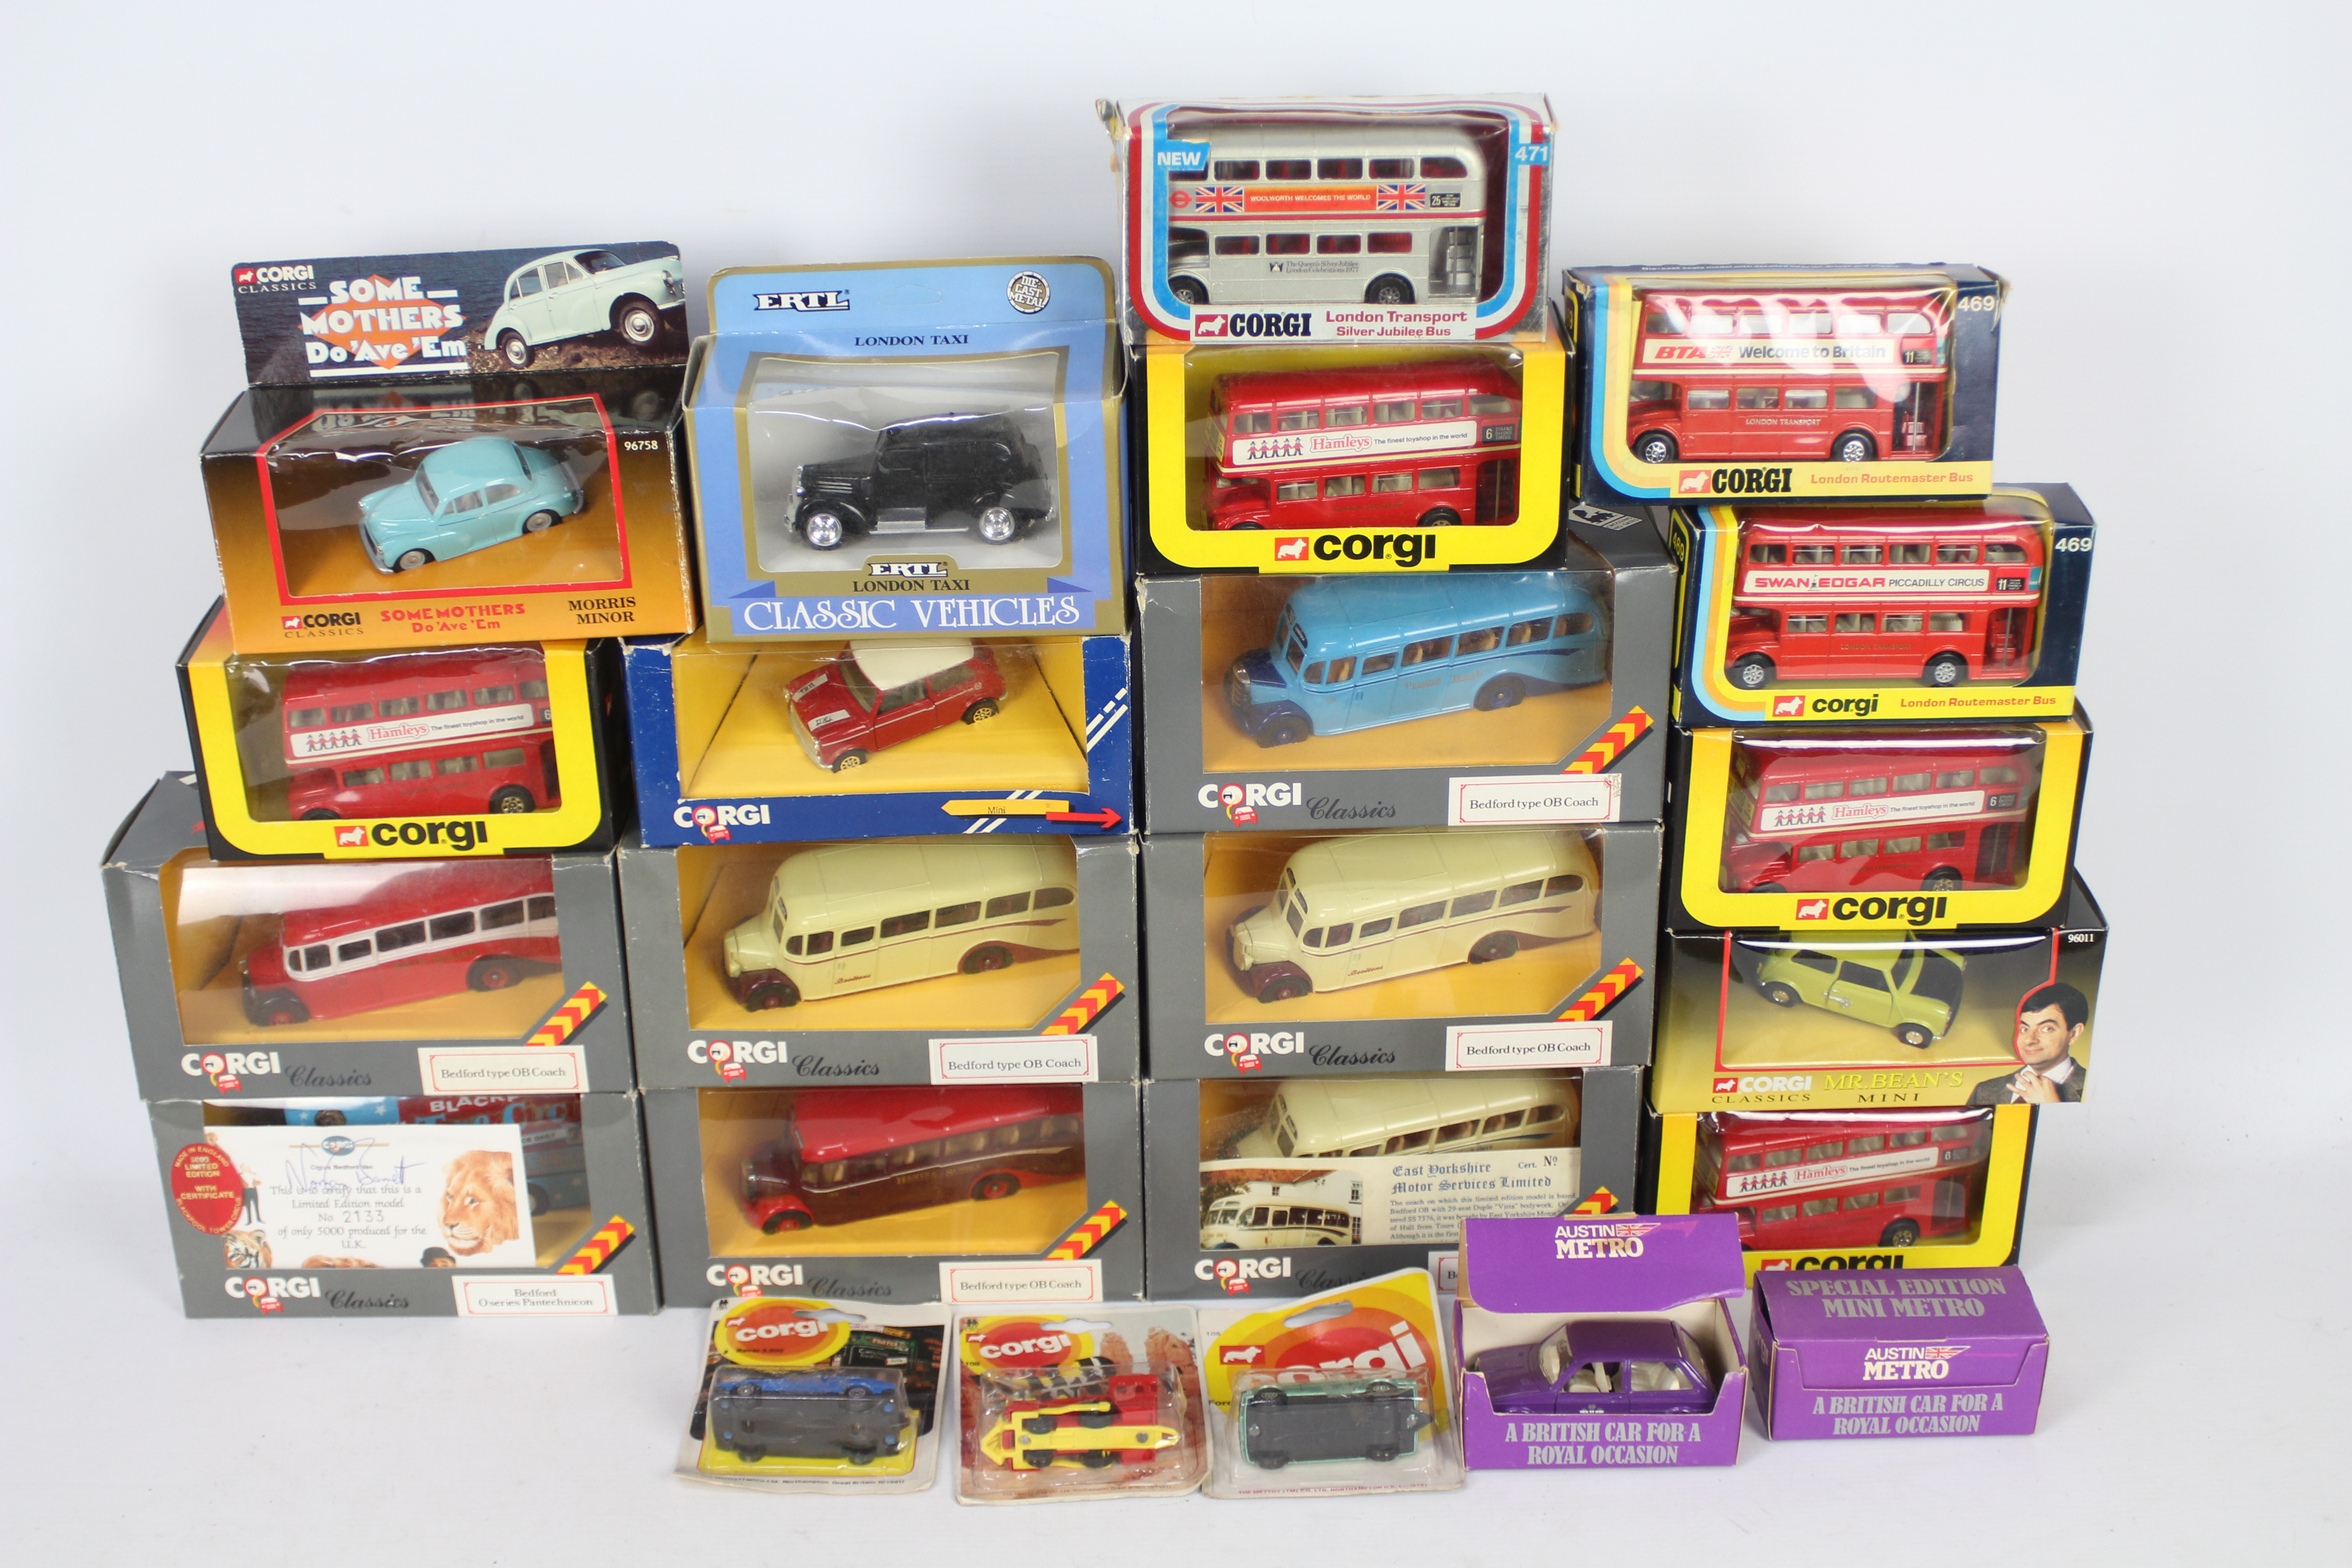 Corgi - Over 20 boxed diecast model vehicles in various scales predominately by Corgi.